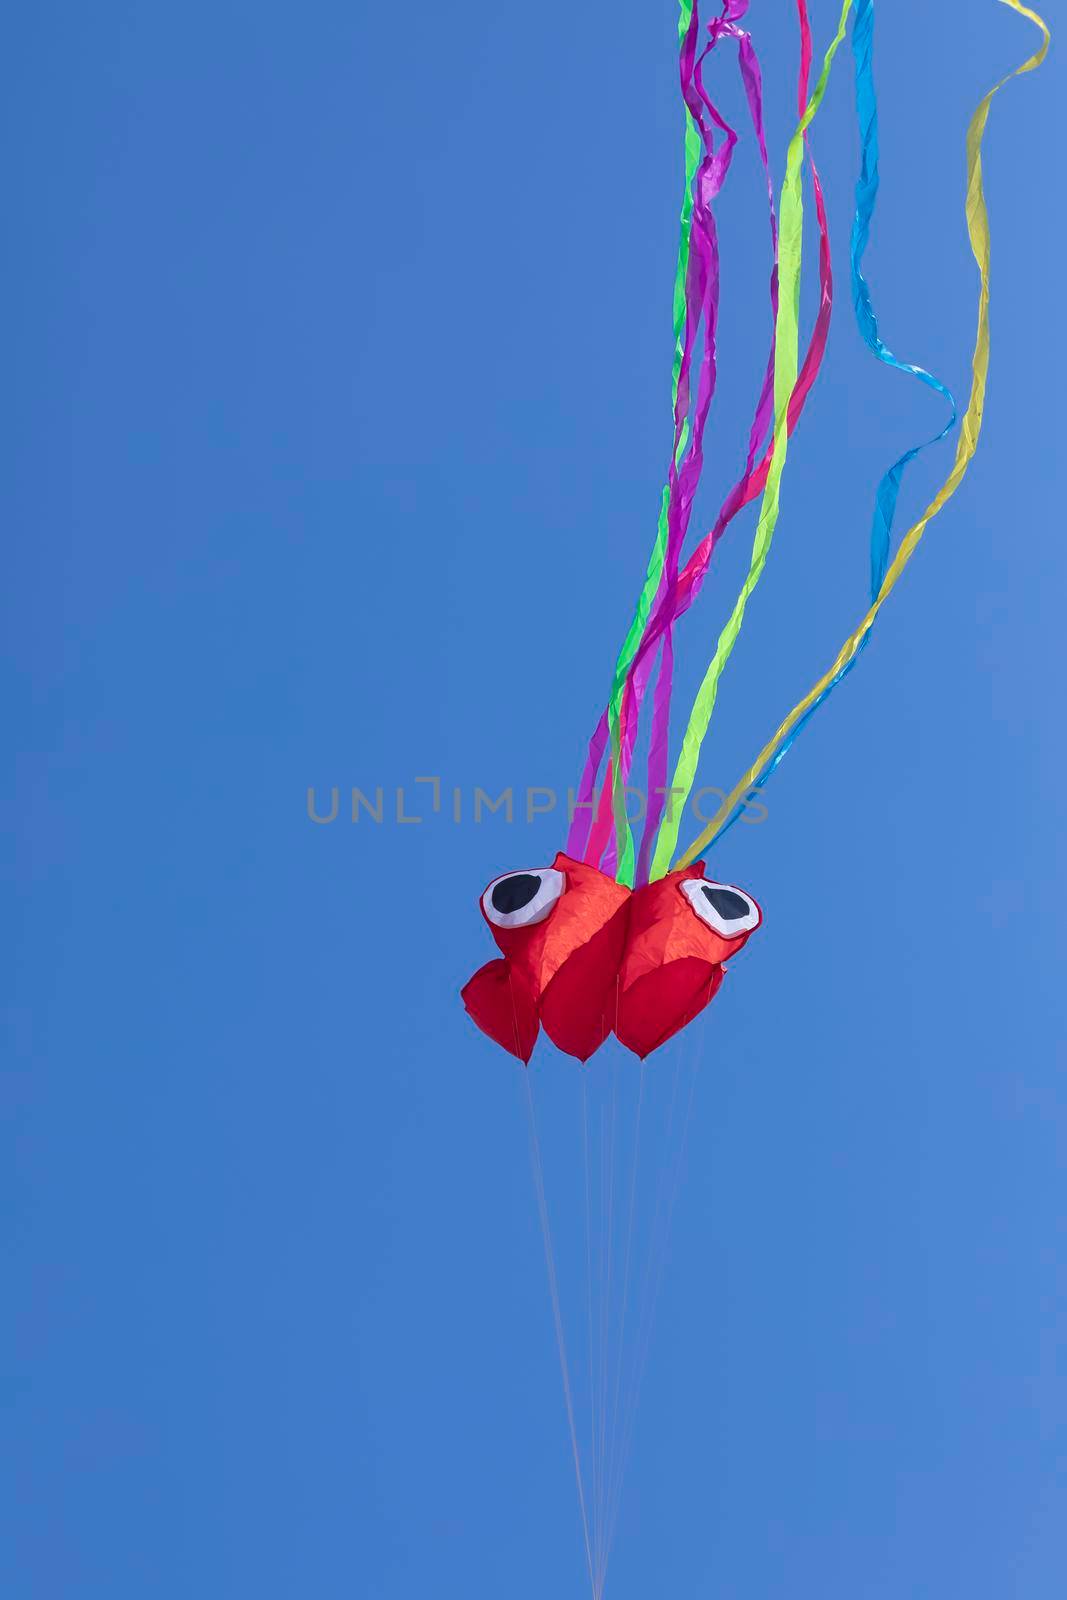 Octopus kite with vivid colors flying. by alvarobueno